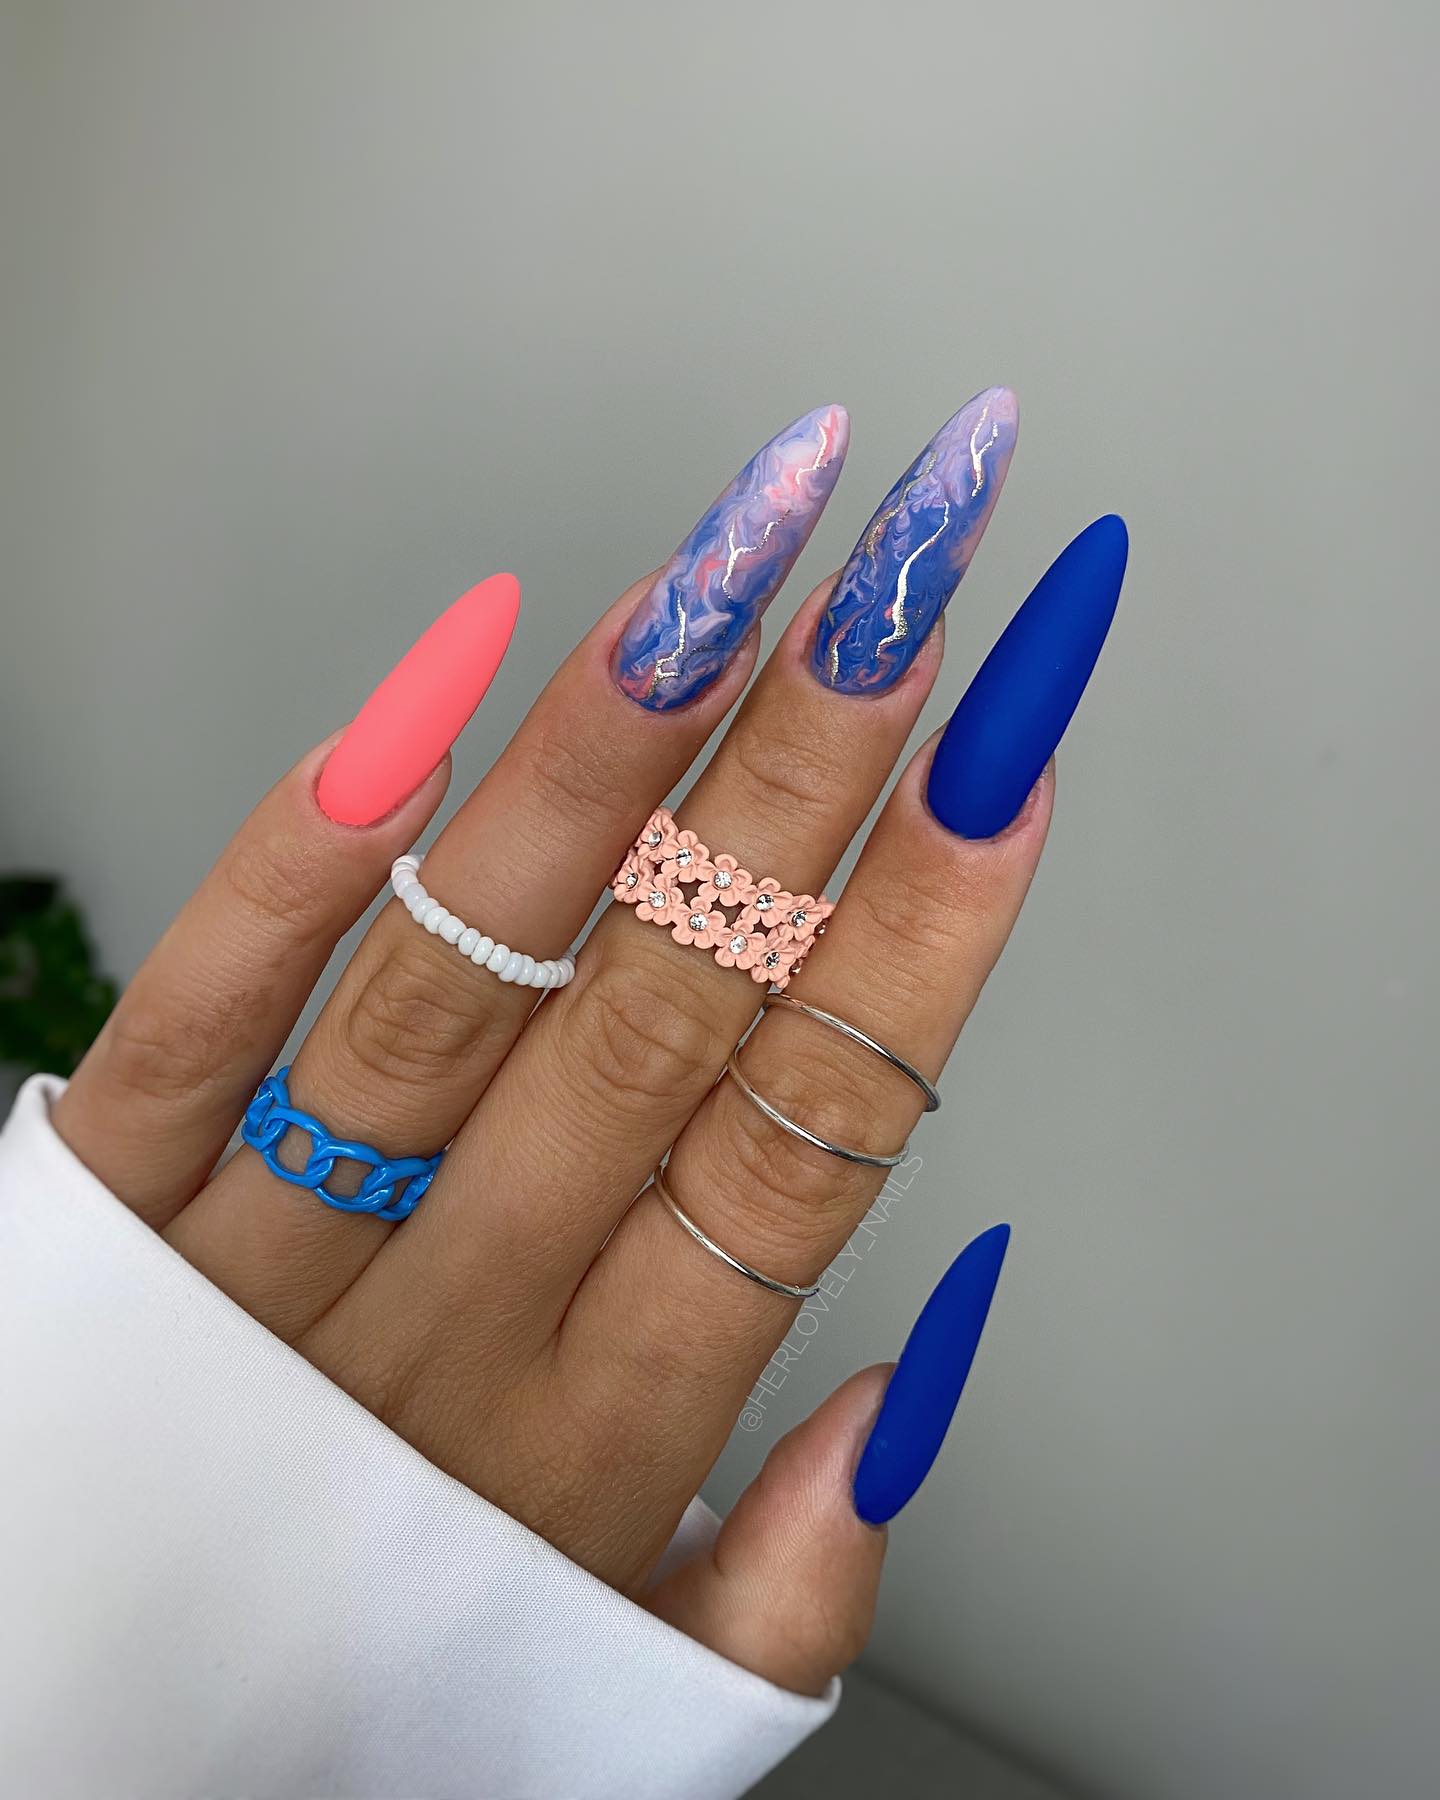 Long Deep Blue Nails with Marble Design